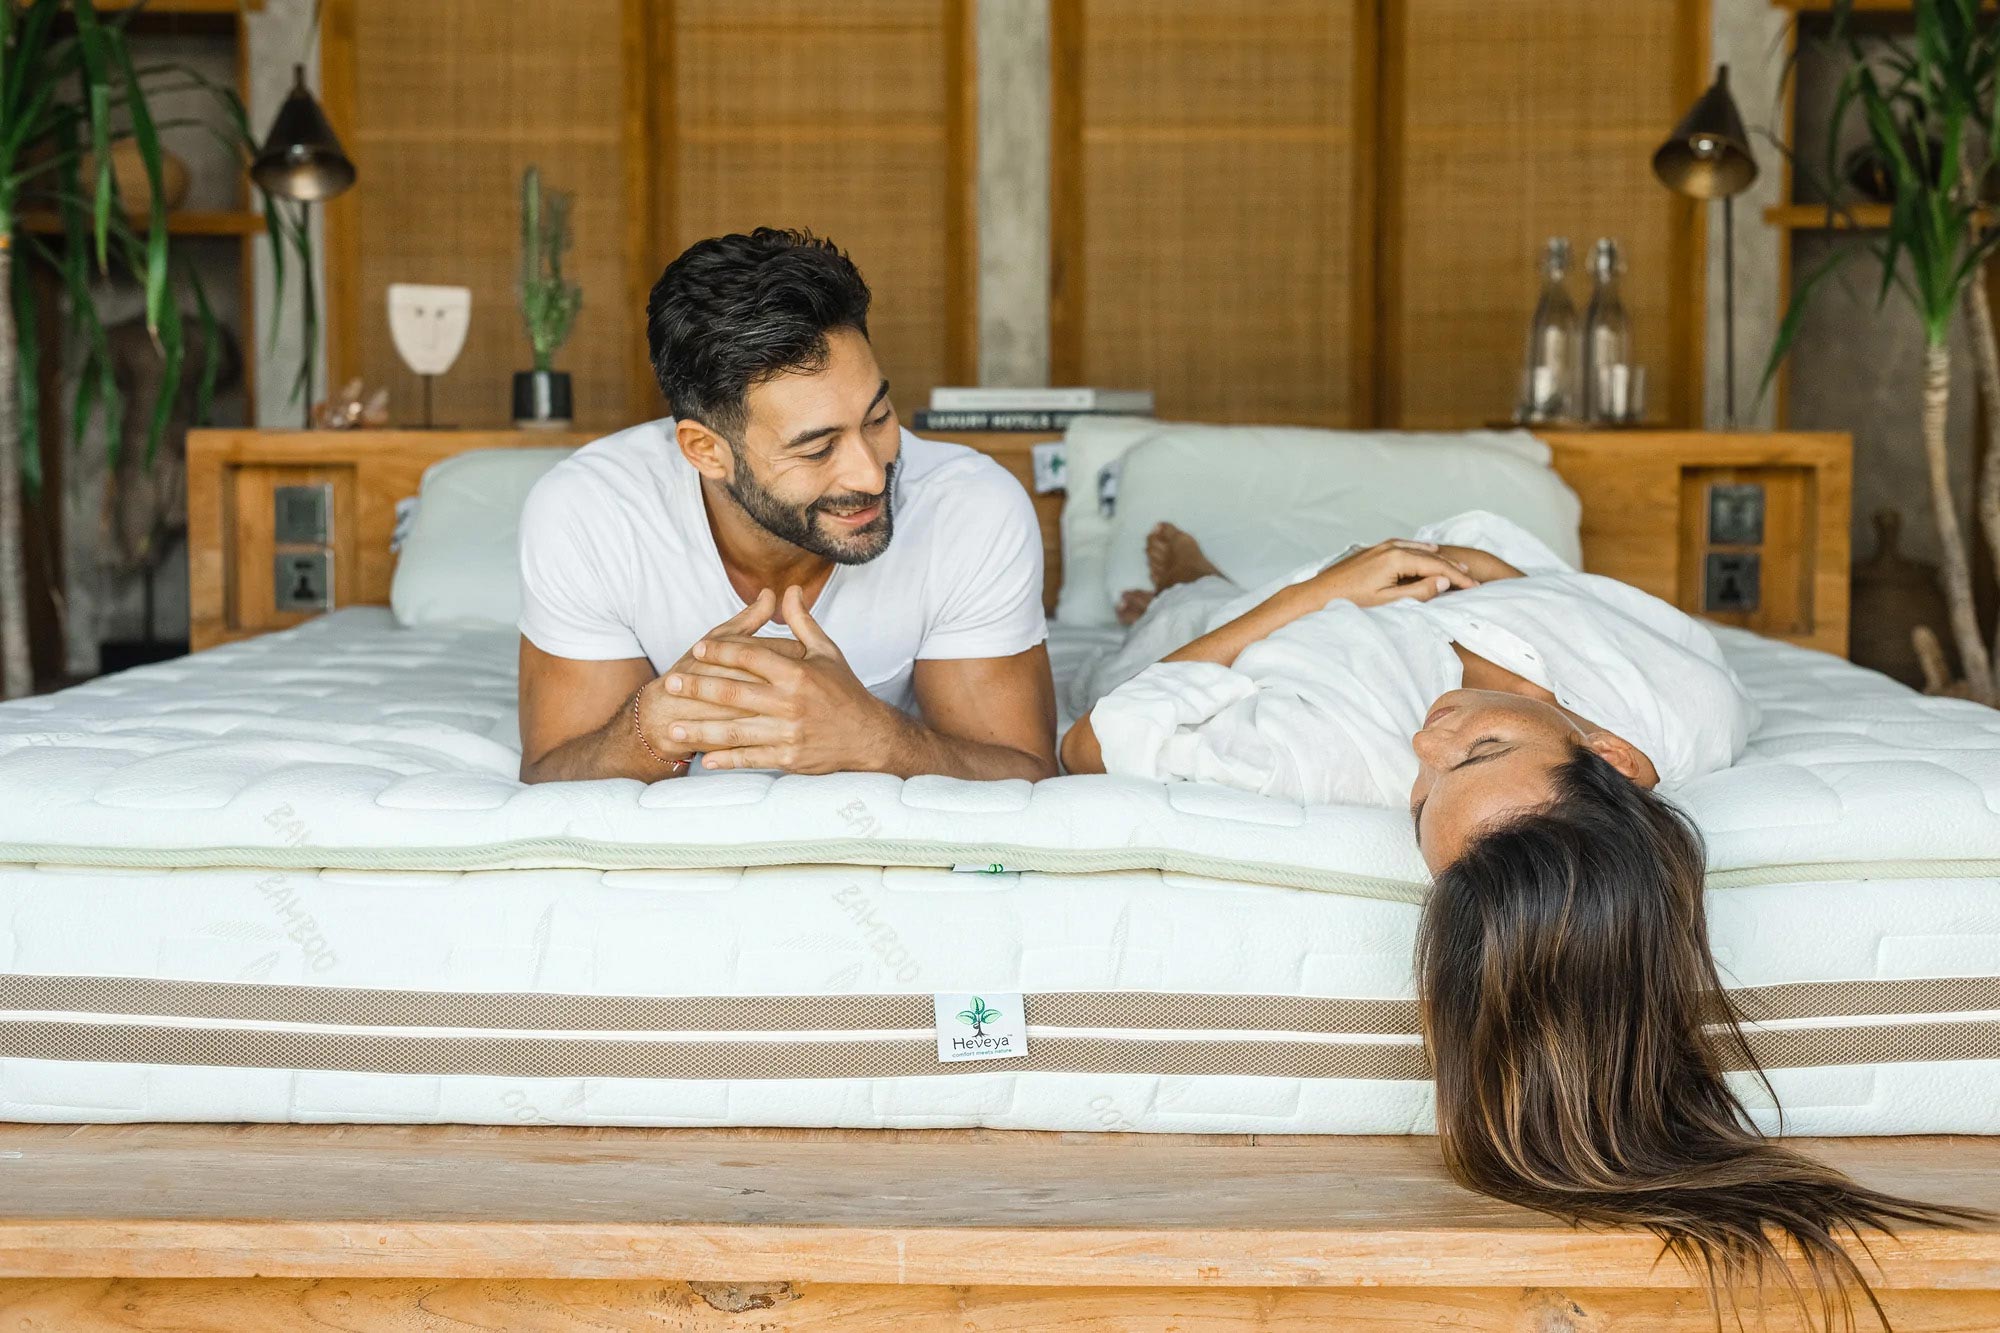 How to Choose the Best Mattress for Couples